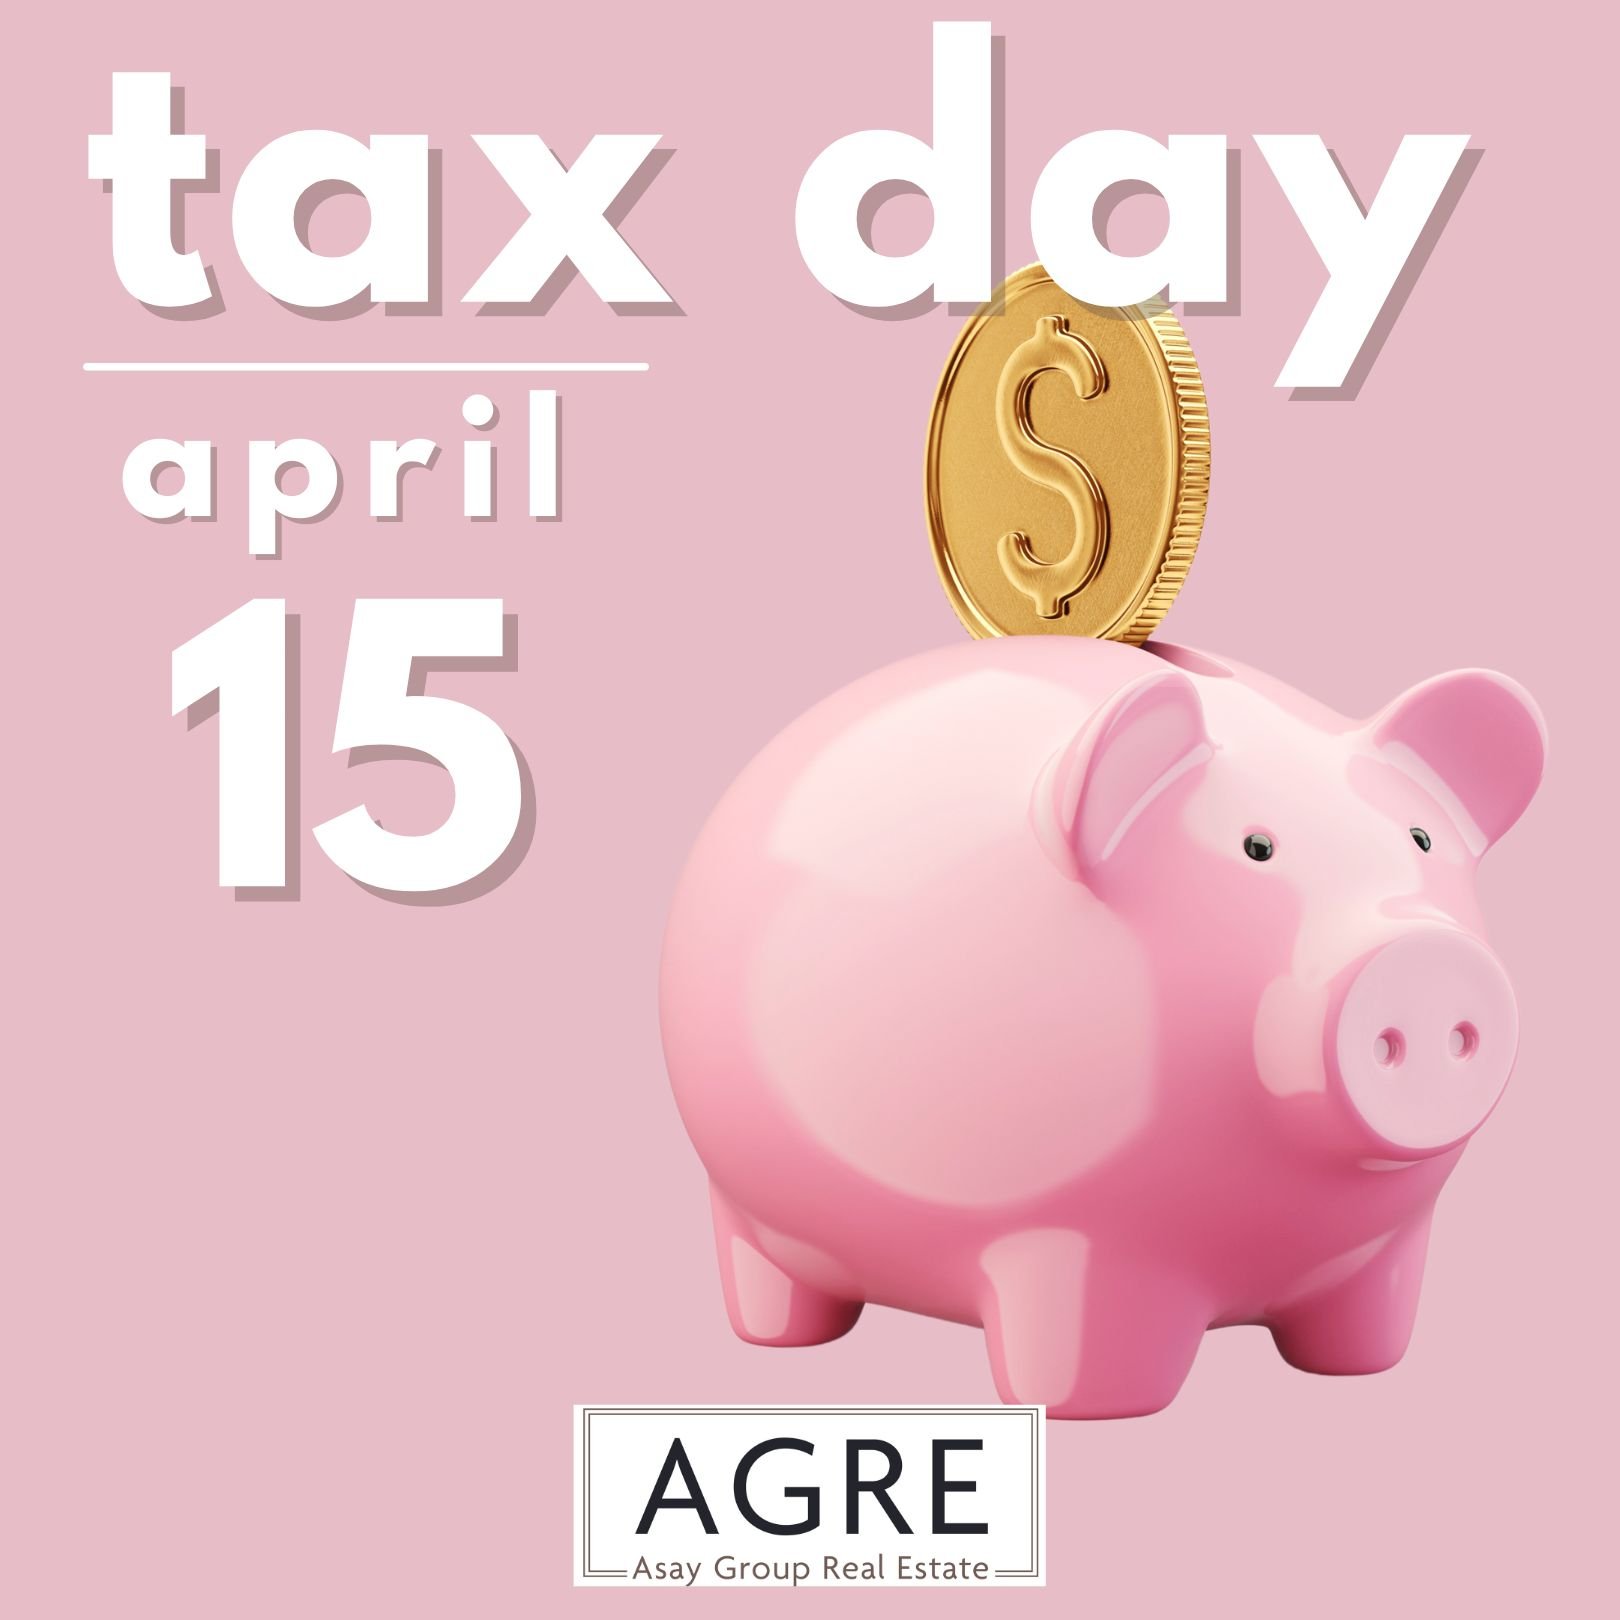 Tax Day + Monday getting you down? Here are a few tax benefits of owning your home. 
💵 Mortgage Interest is tax deductible 
💵 Property Taxes are deductible
💵 Mortgage Points are deductible in the year you paid them (sometimes longer!)
💵 Home offi